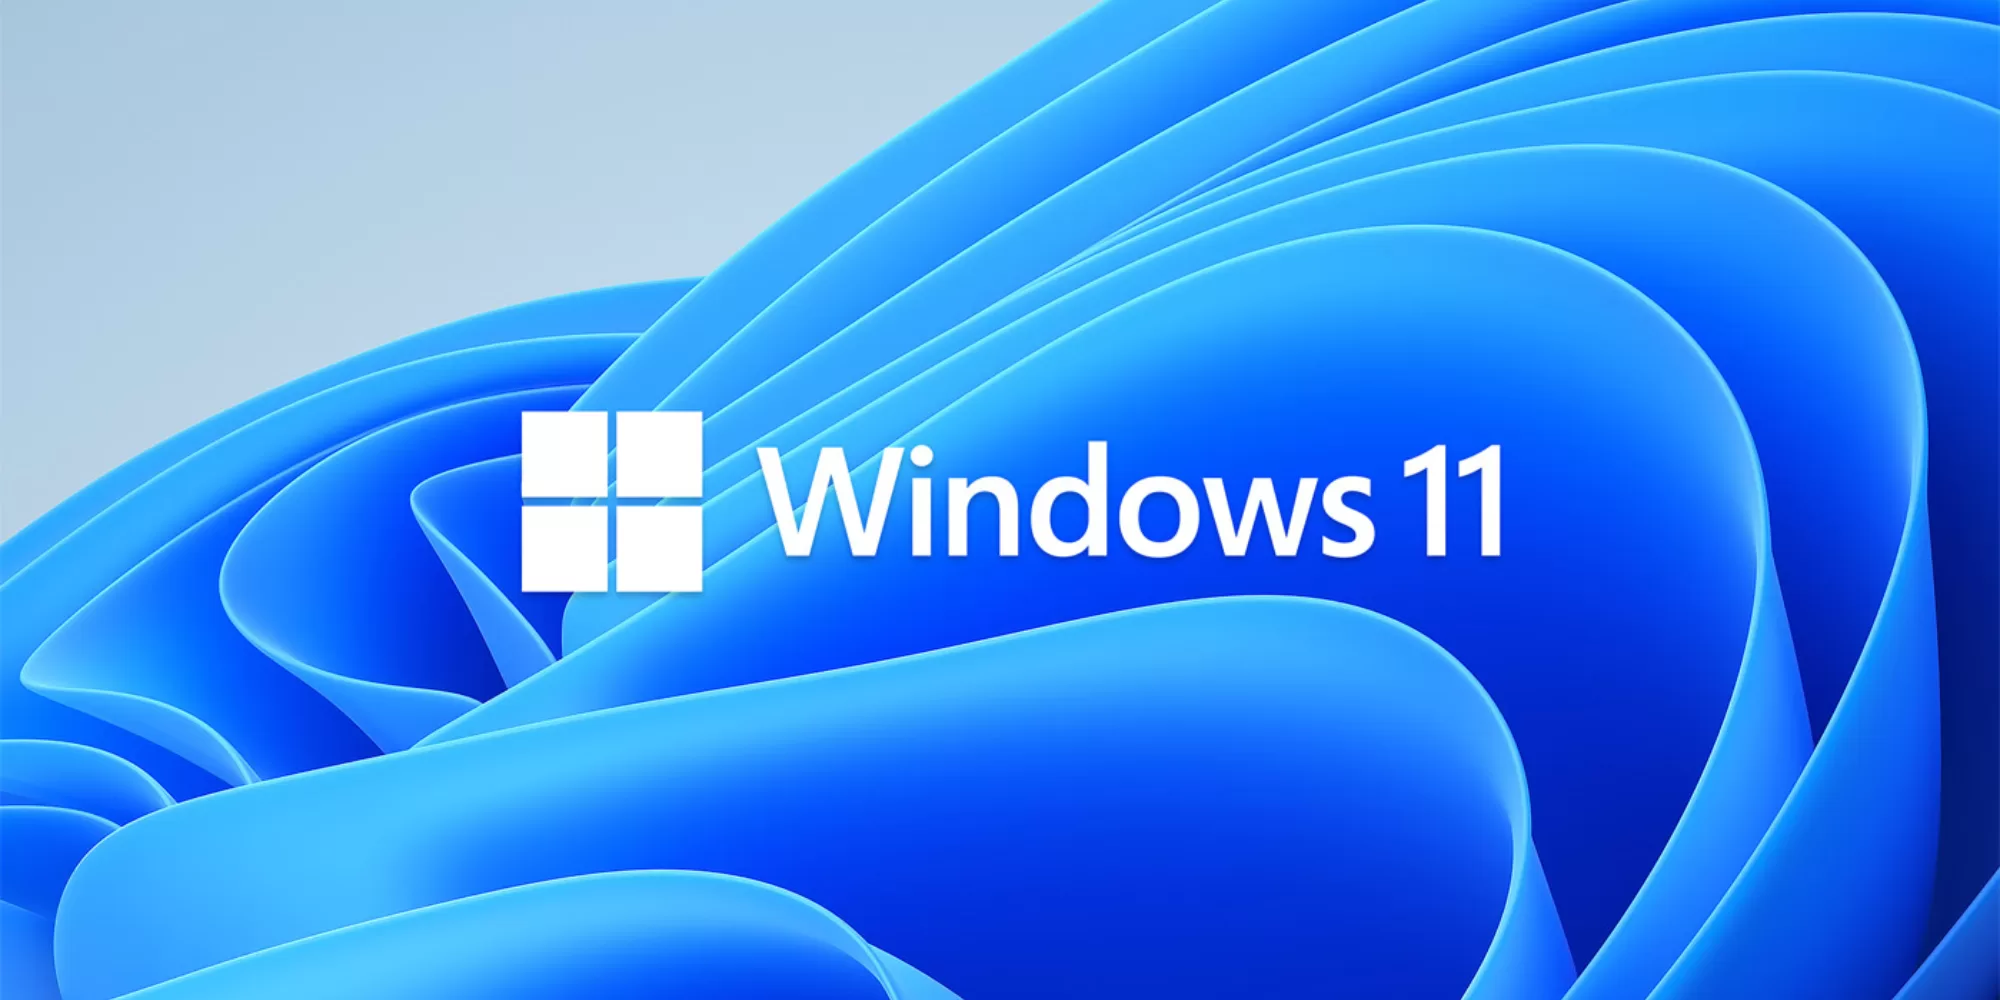 Windows 11 will be a free upgrade